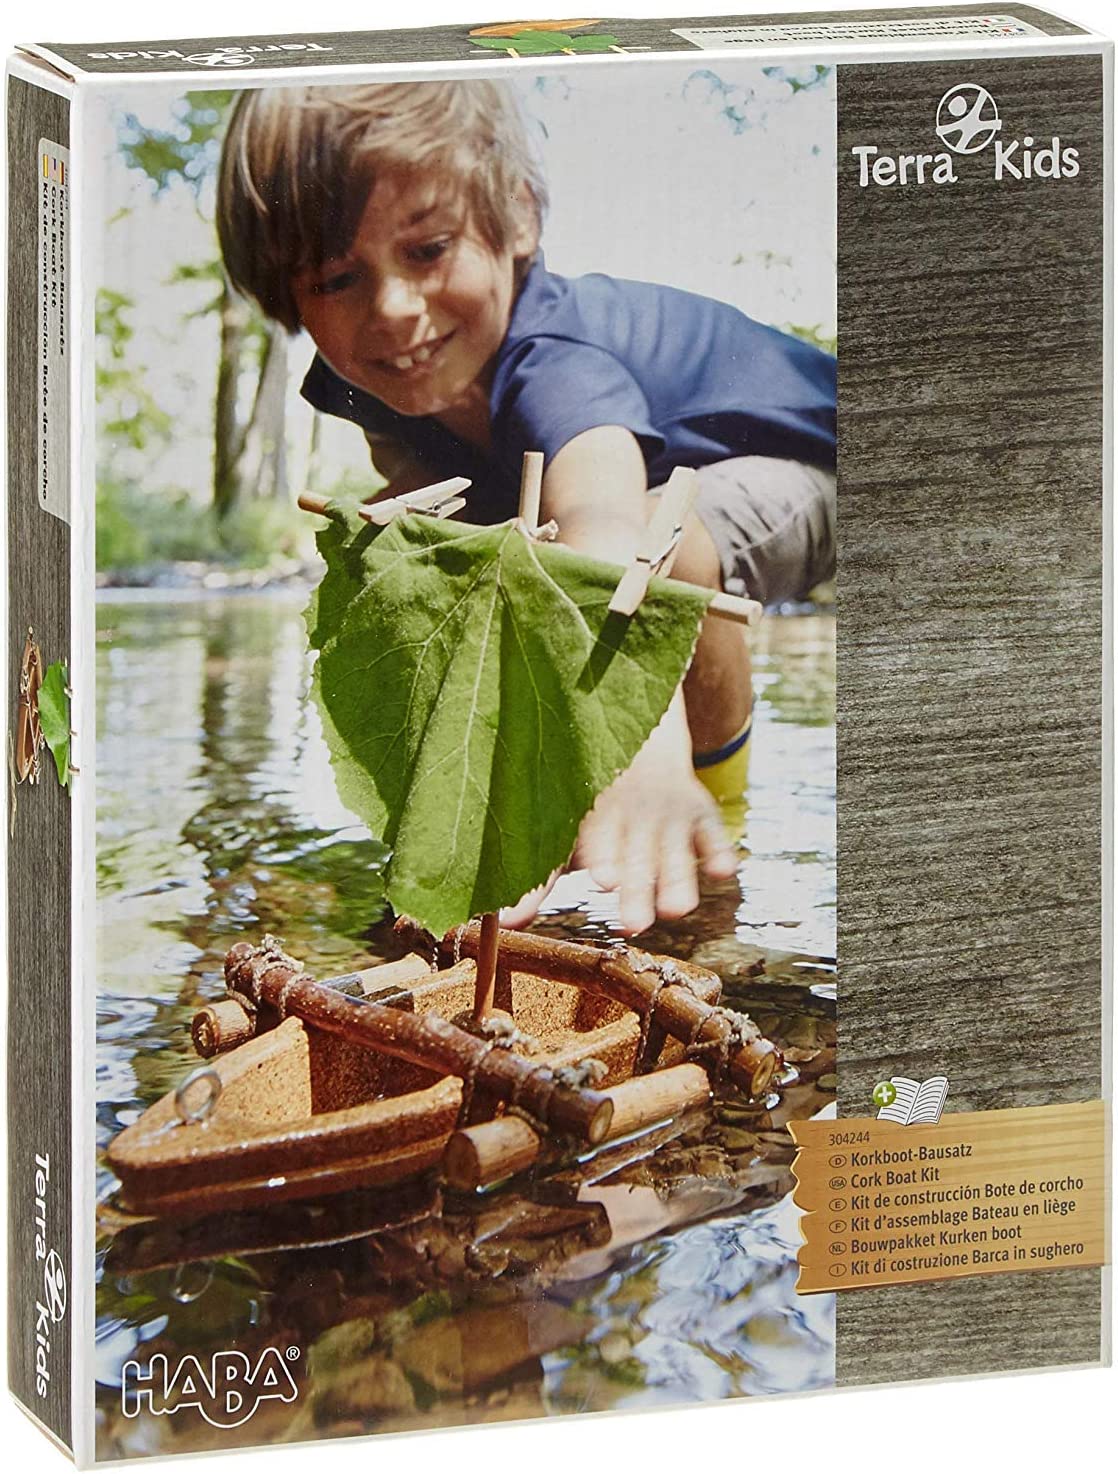 HABA Terra Kids 55684171 304244 Cork Boat Kit, Kit and Instructions for Building a Cork Boat for Children (22.2 x 9.5 x 3.8 cm), with Optimal Swimming Properties